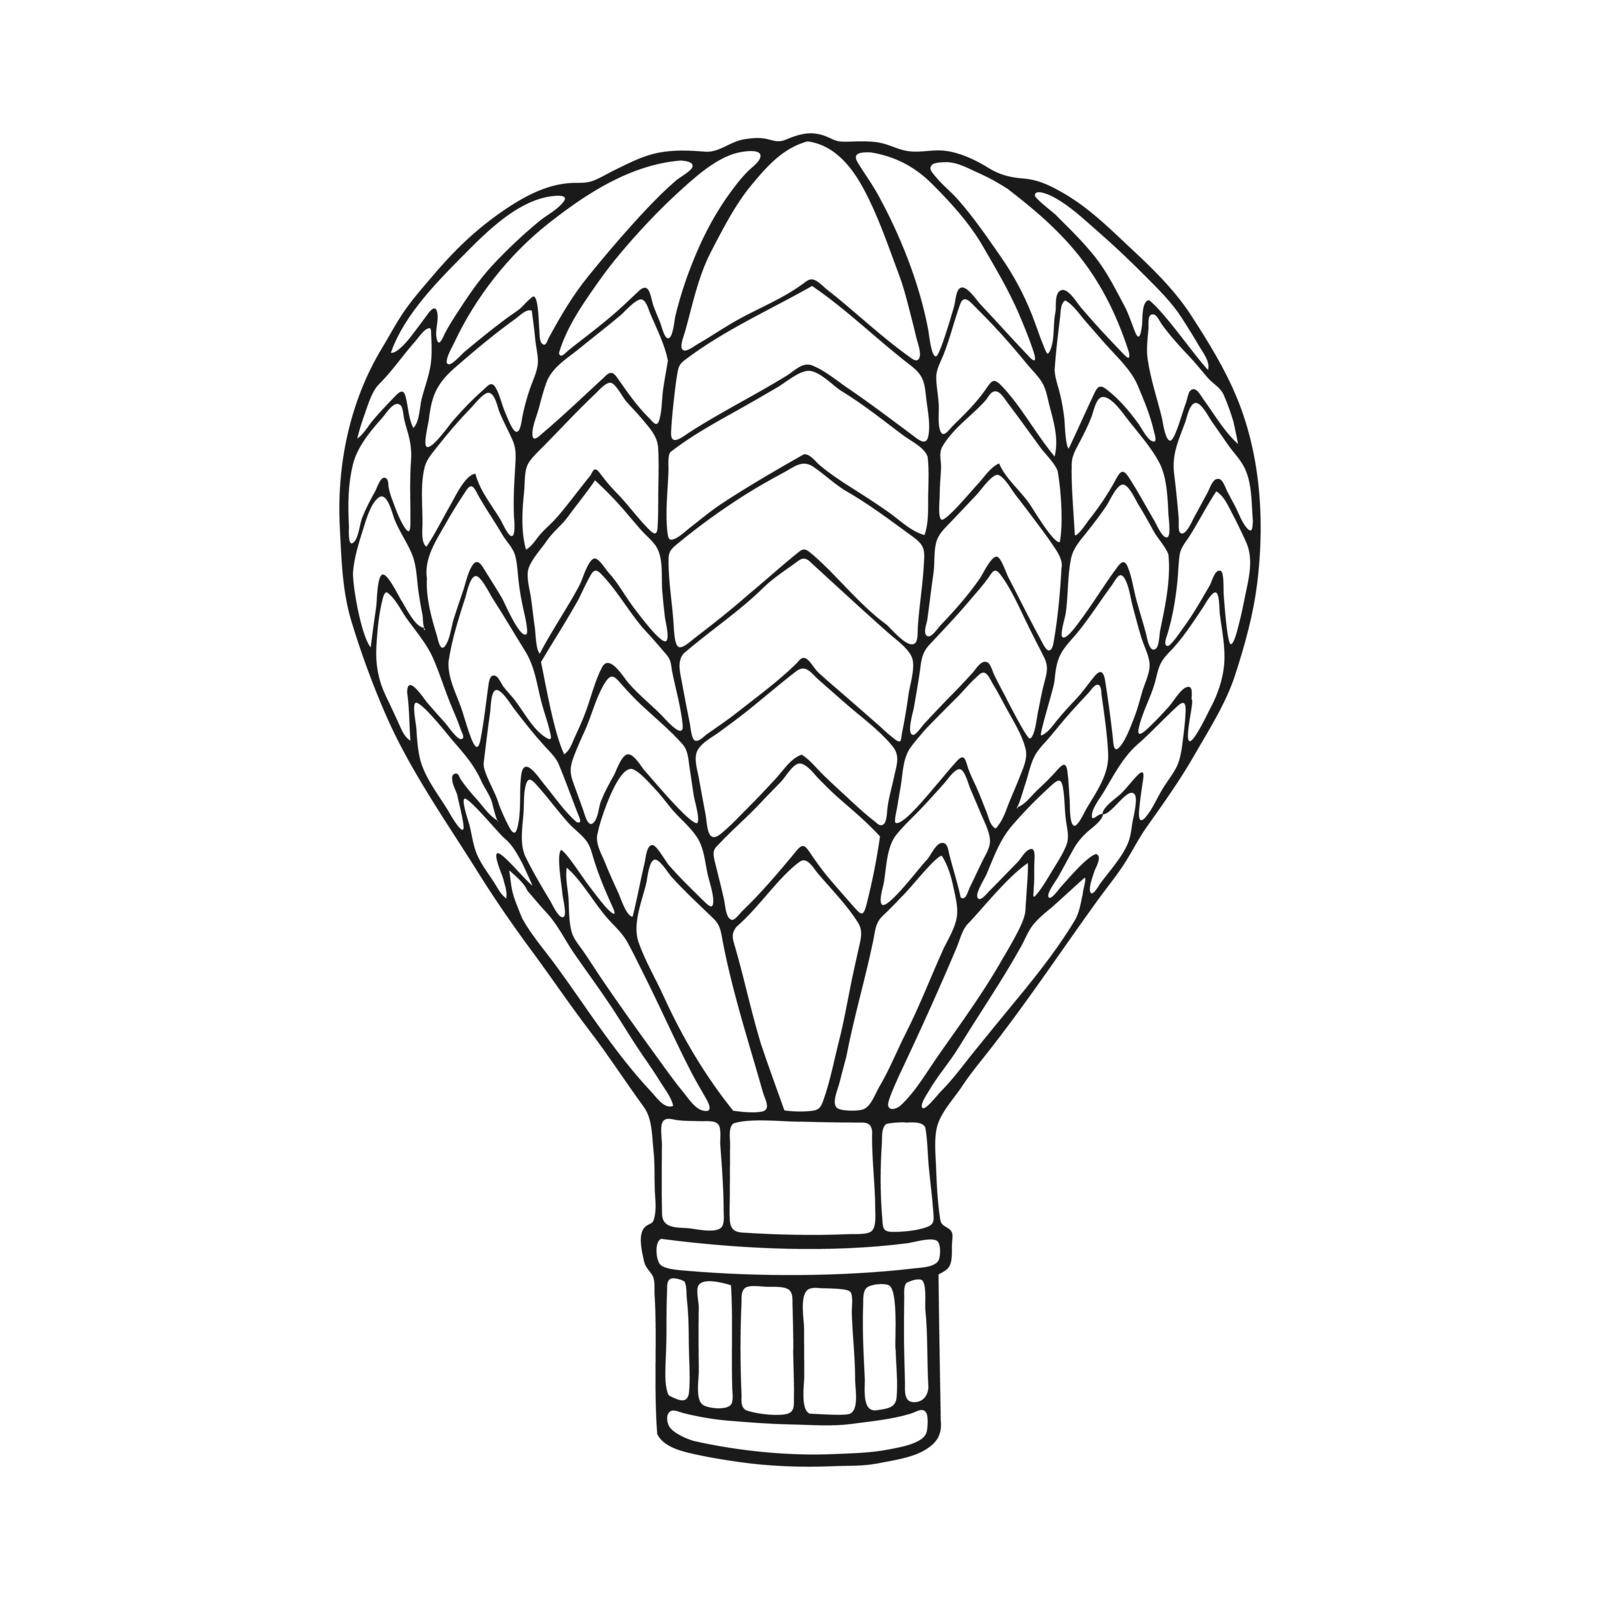 Hot air balloon hand drawn outline doodle. Vector illustration.